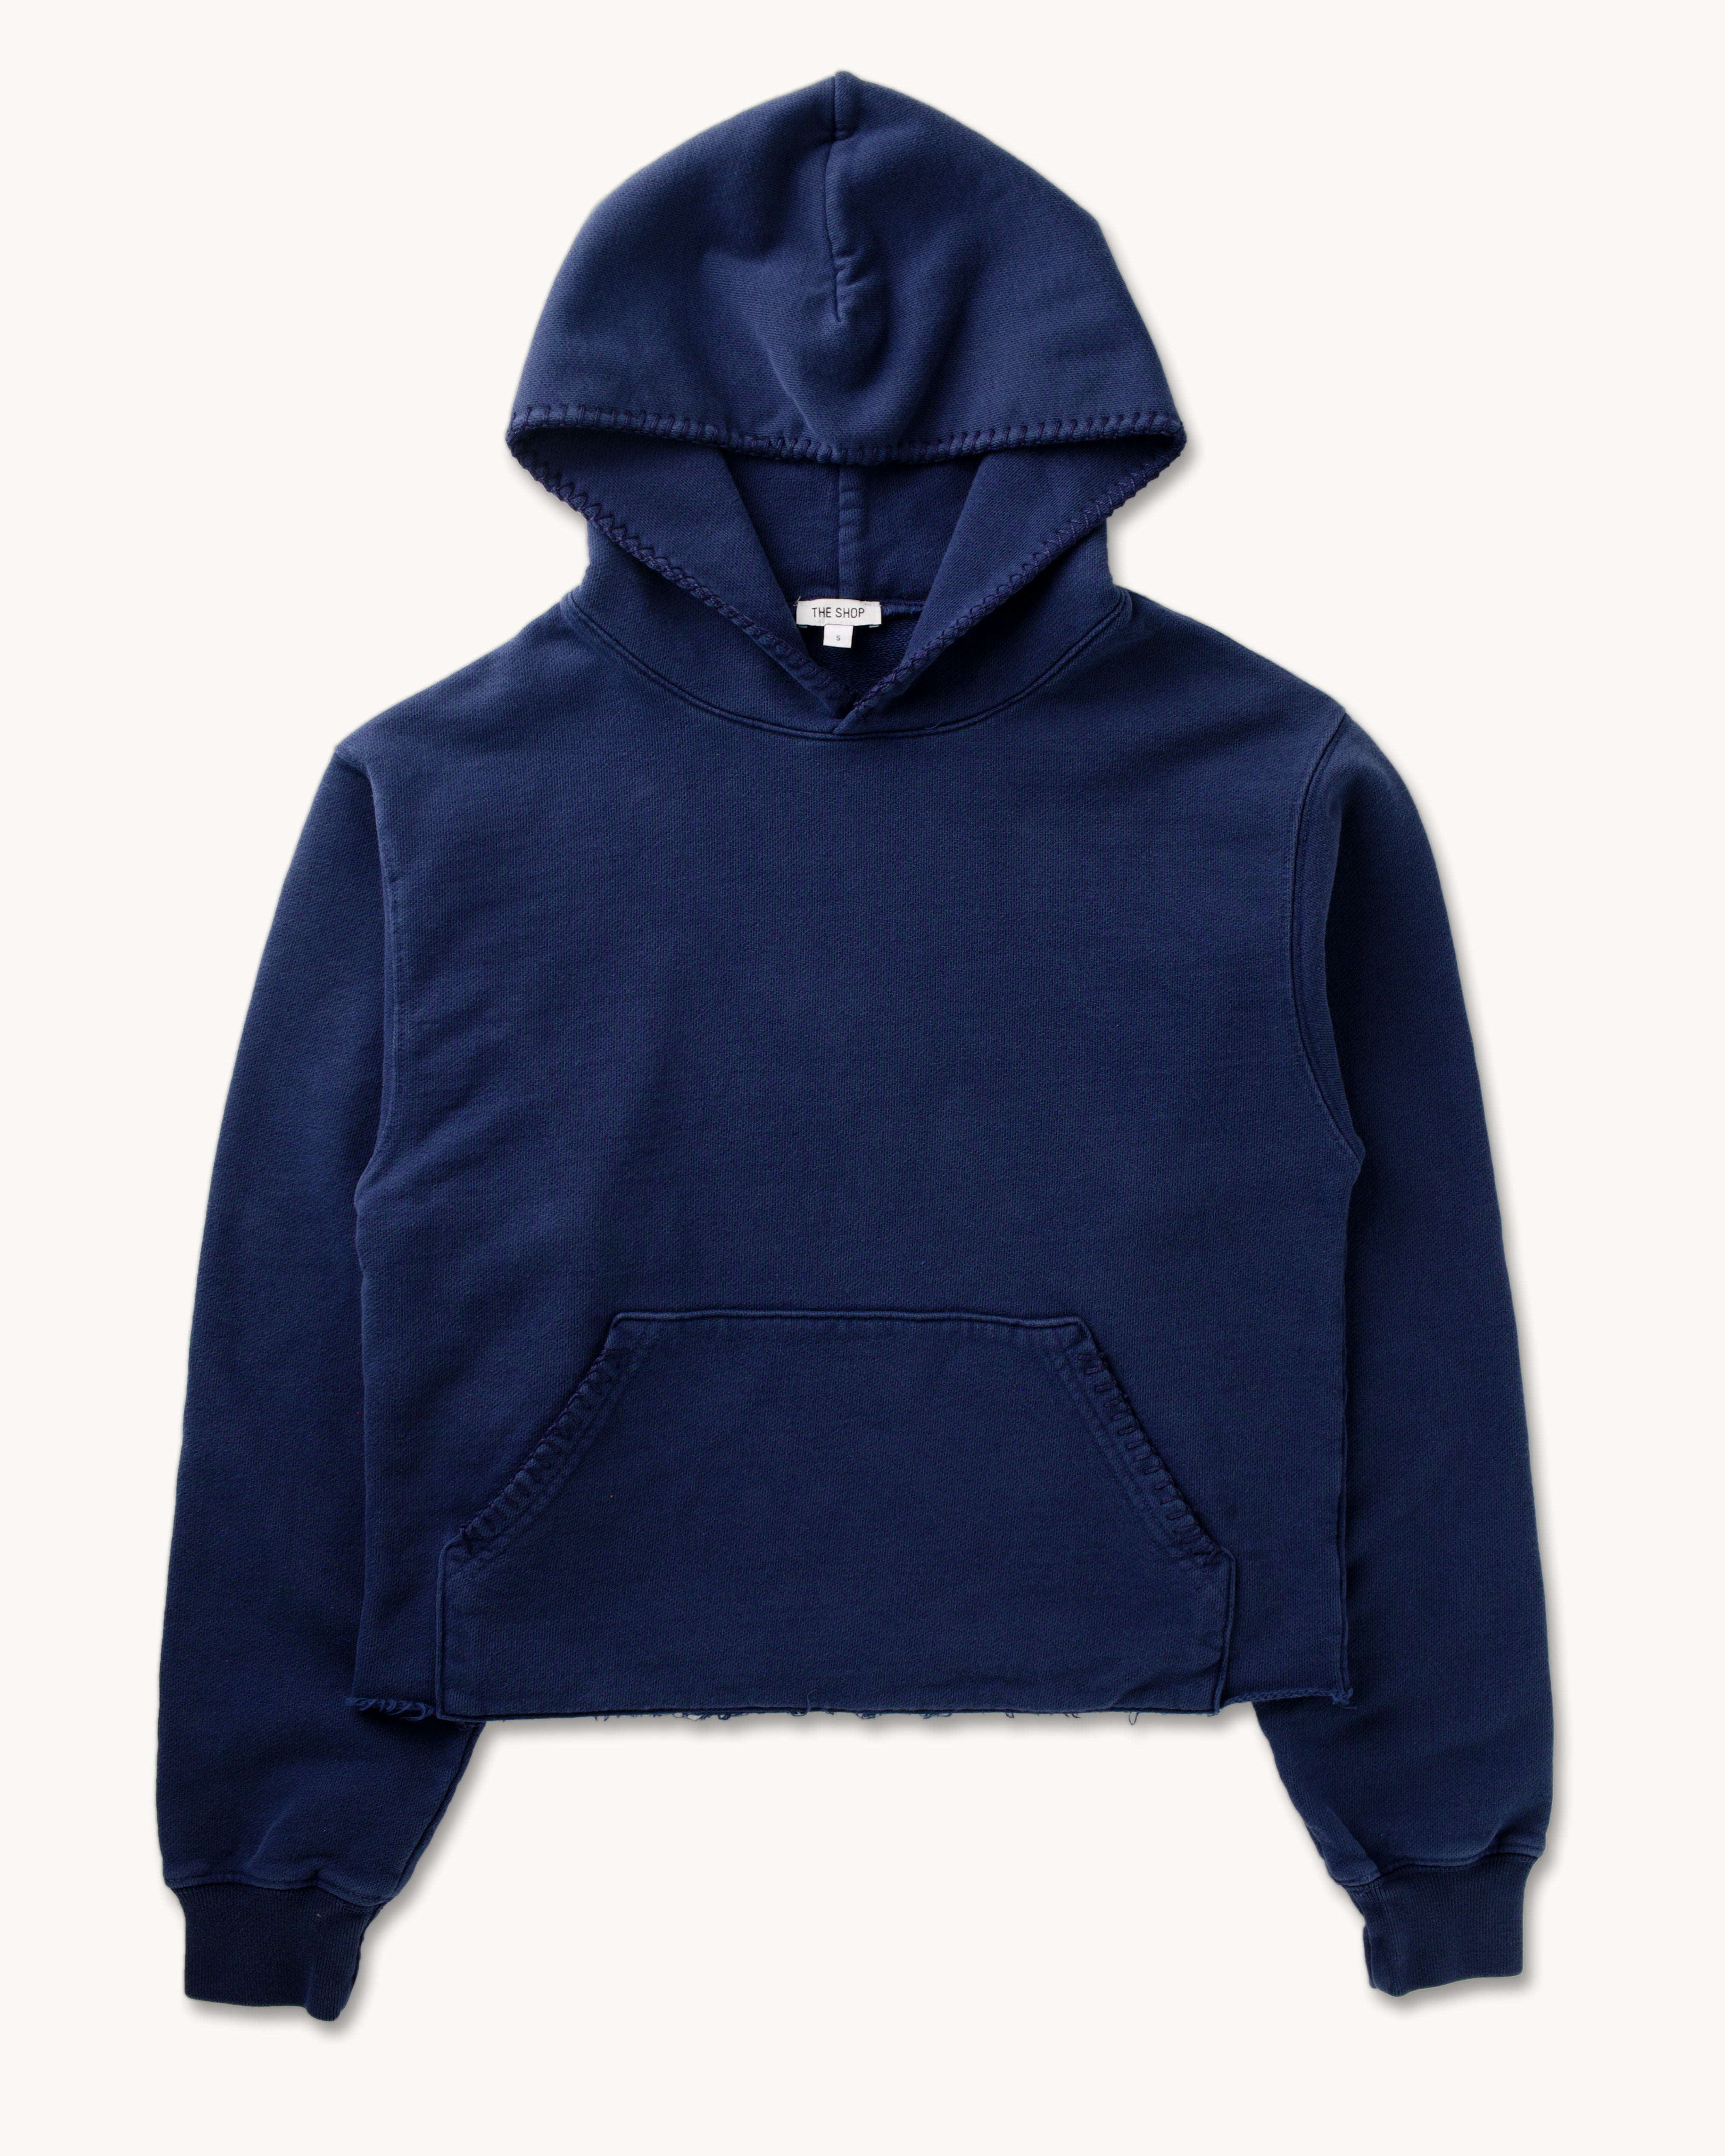 Distressed French Terry Hoodie